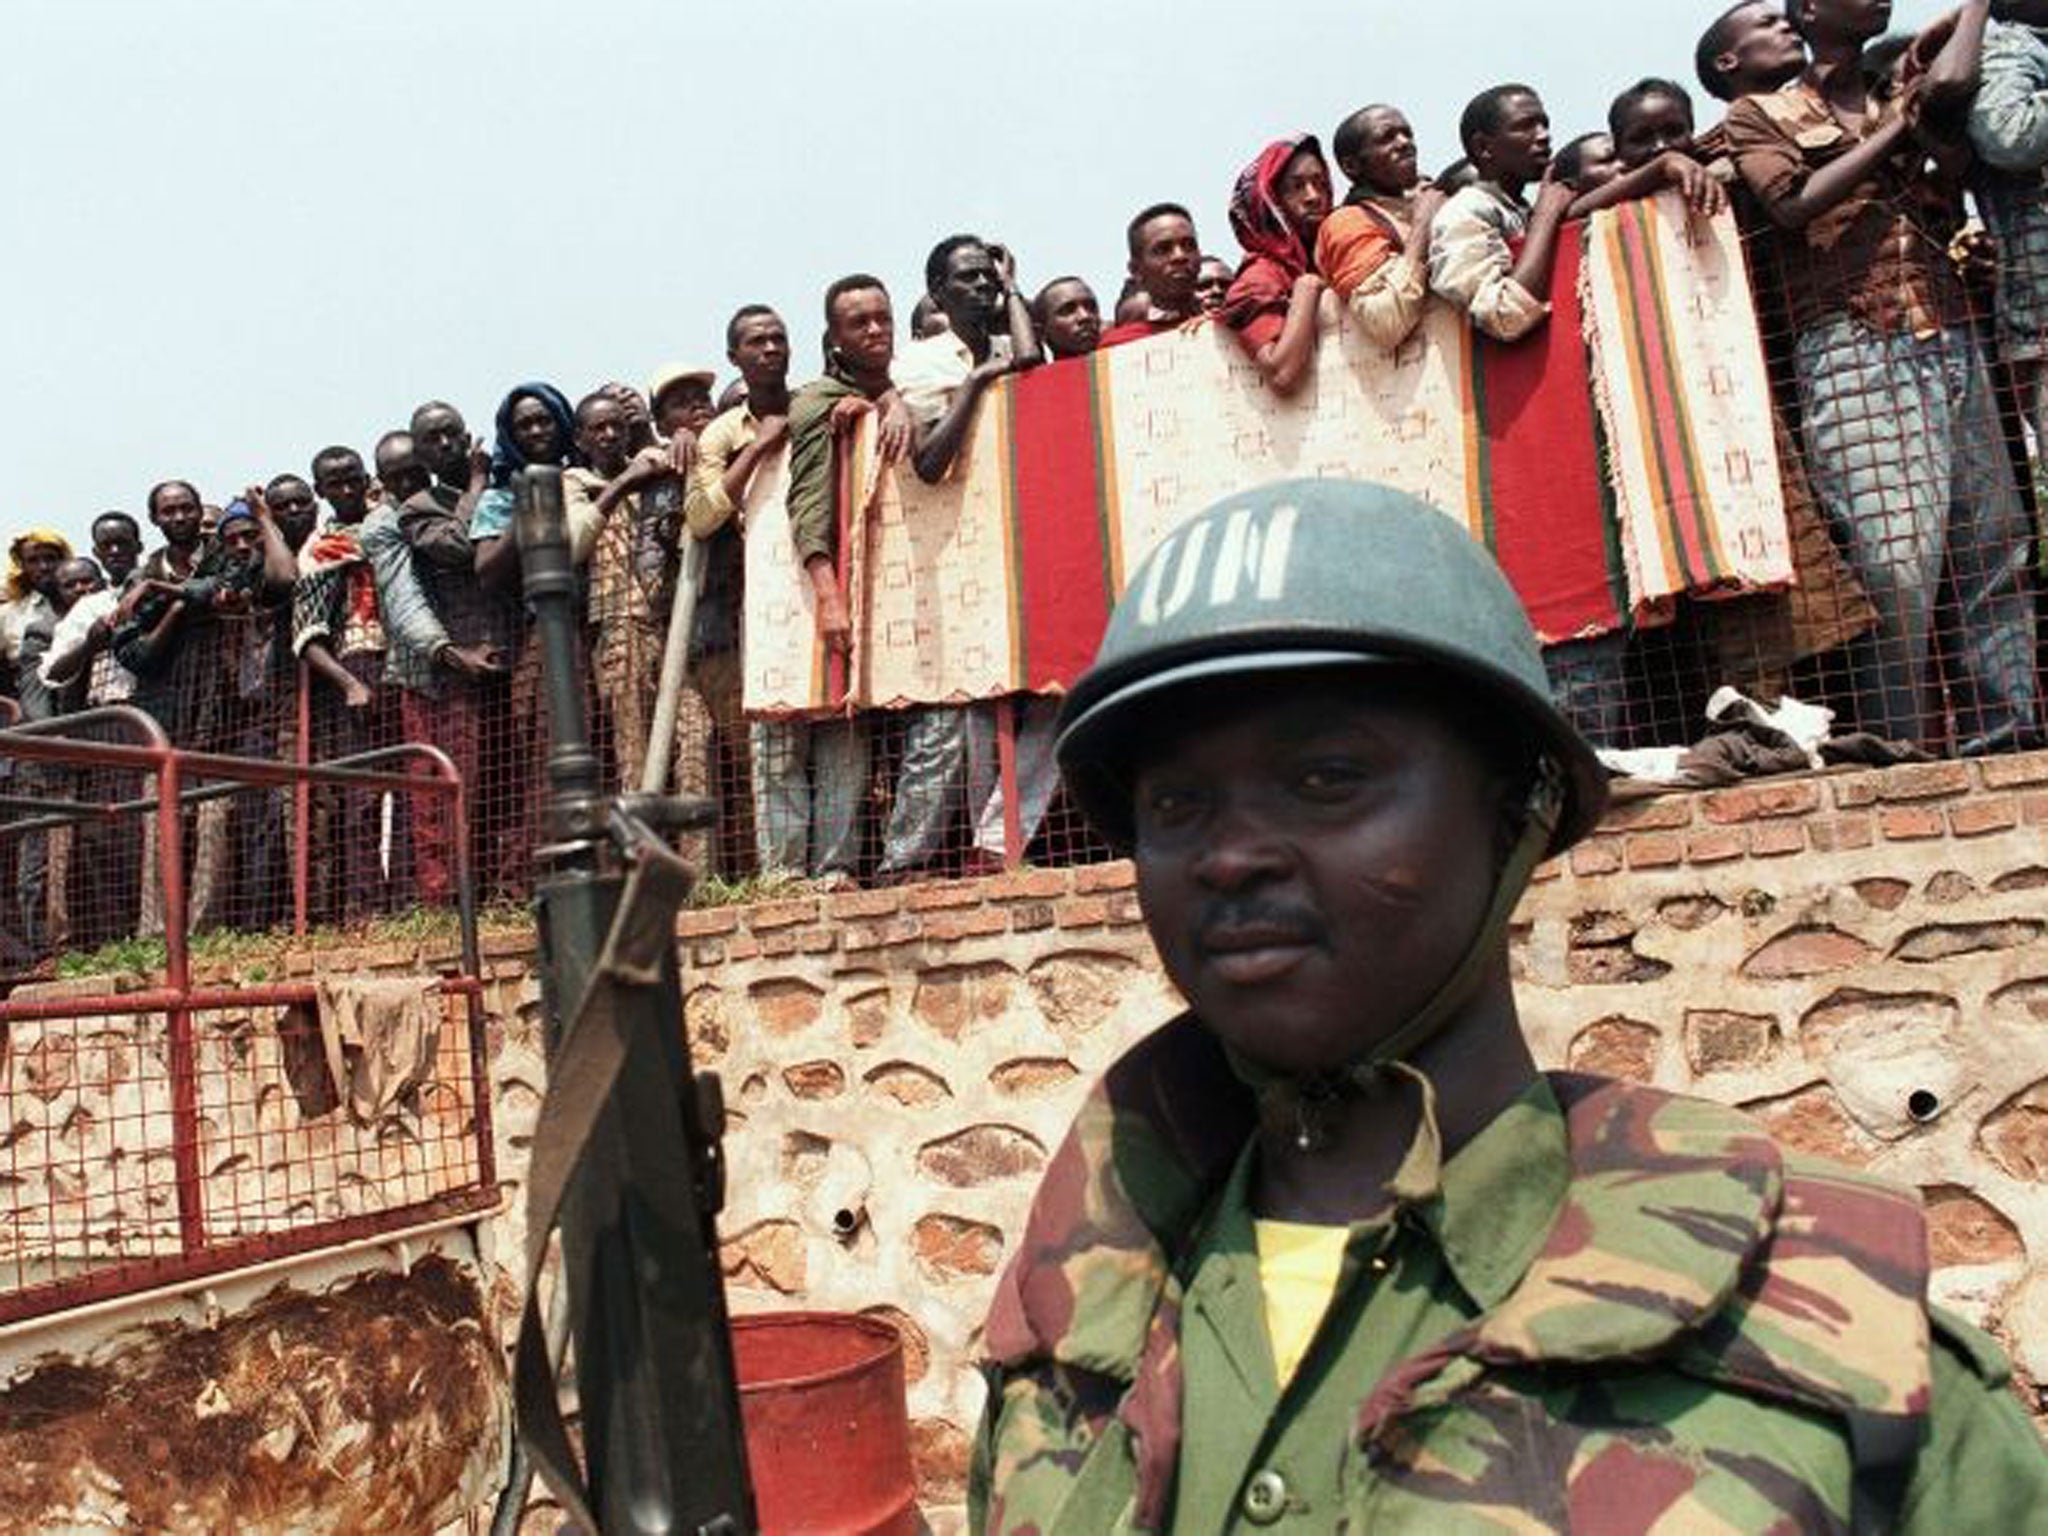 A Ghanaian UN soldier watches over Tutsi refugees being led from a Kigali church in June 1994